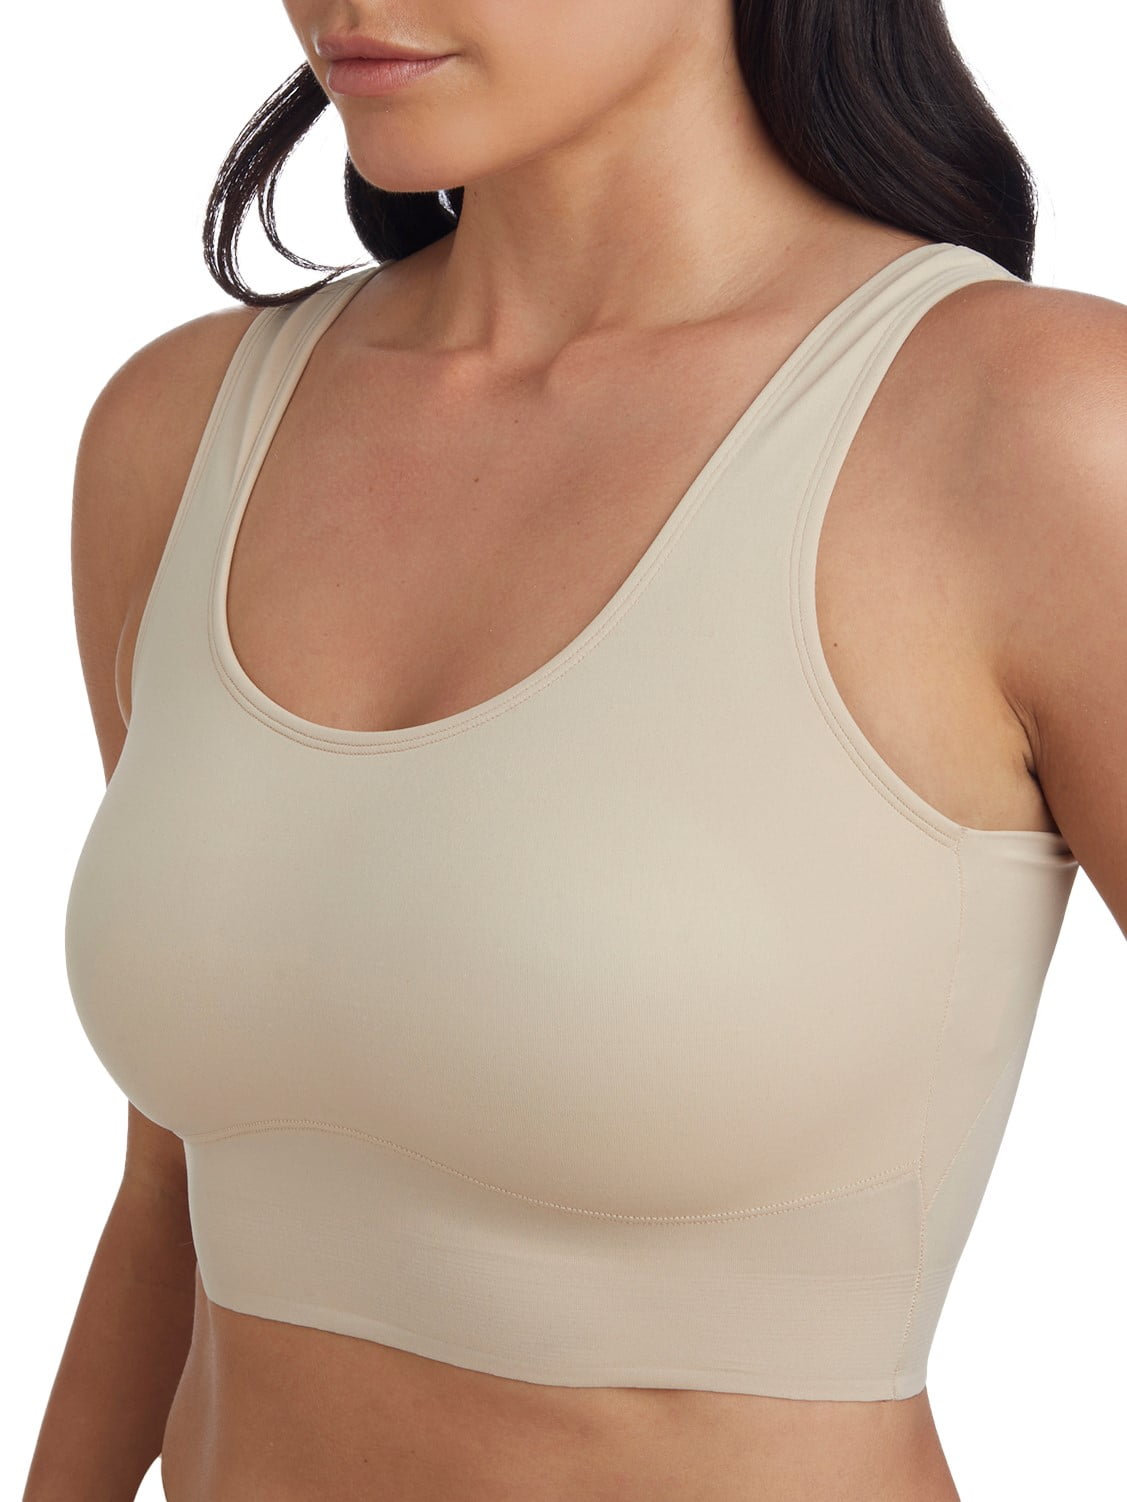 Cupid Women's Firm Control Top Shaping Scoop Neck Lounge Bra